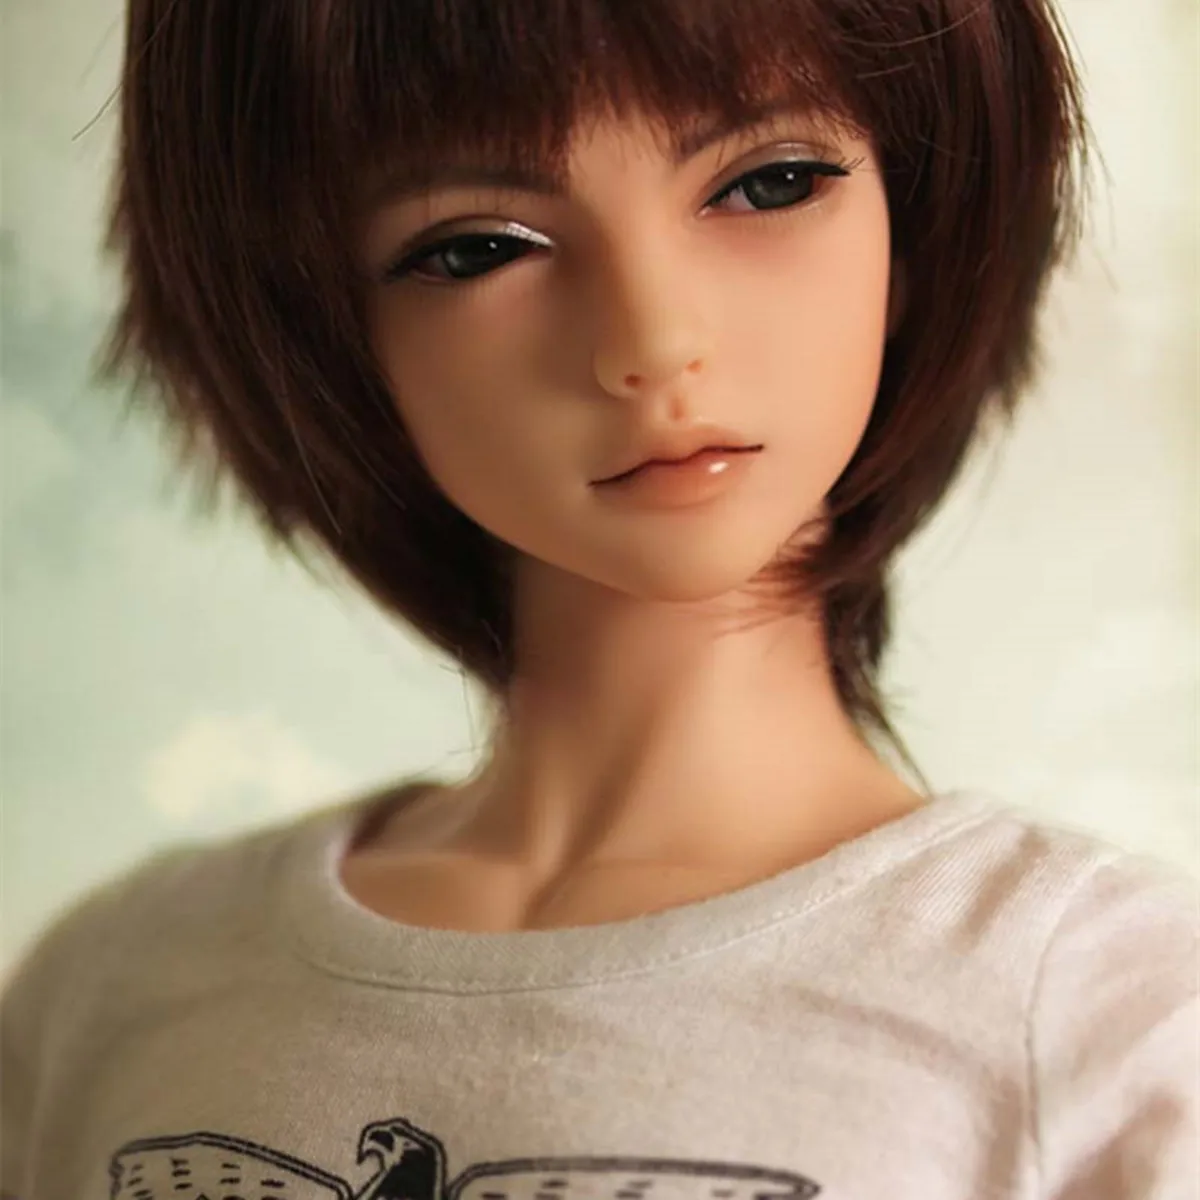 

New Arrival 1/4 BJD Doll BJD / SD Daniels Boy Doll Handsome Include Eyes For Baby Girl Birthday Gift Free Shipping